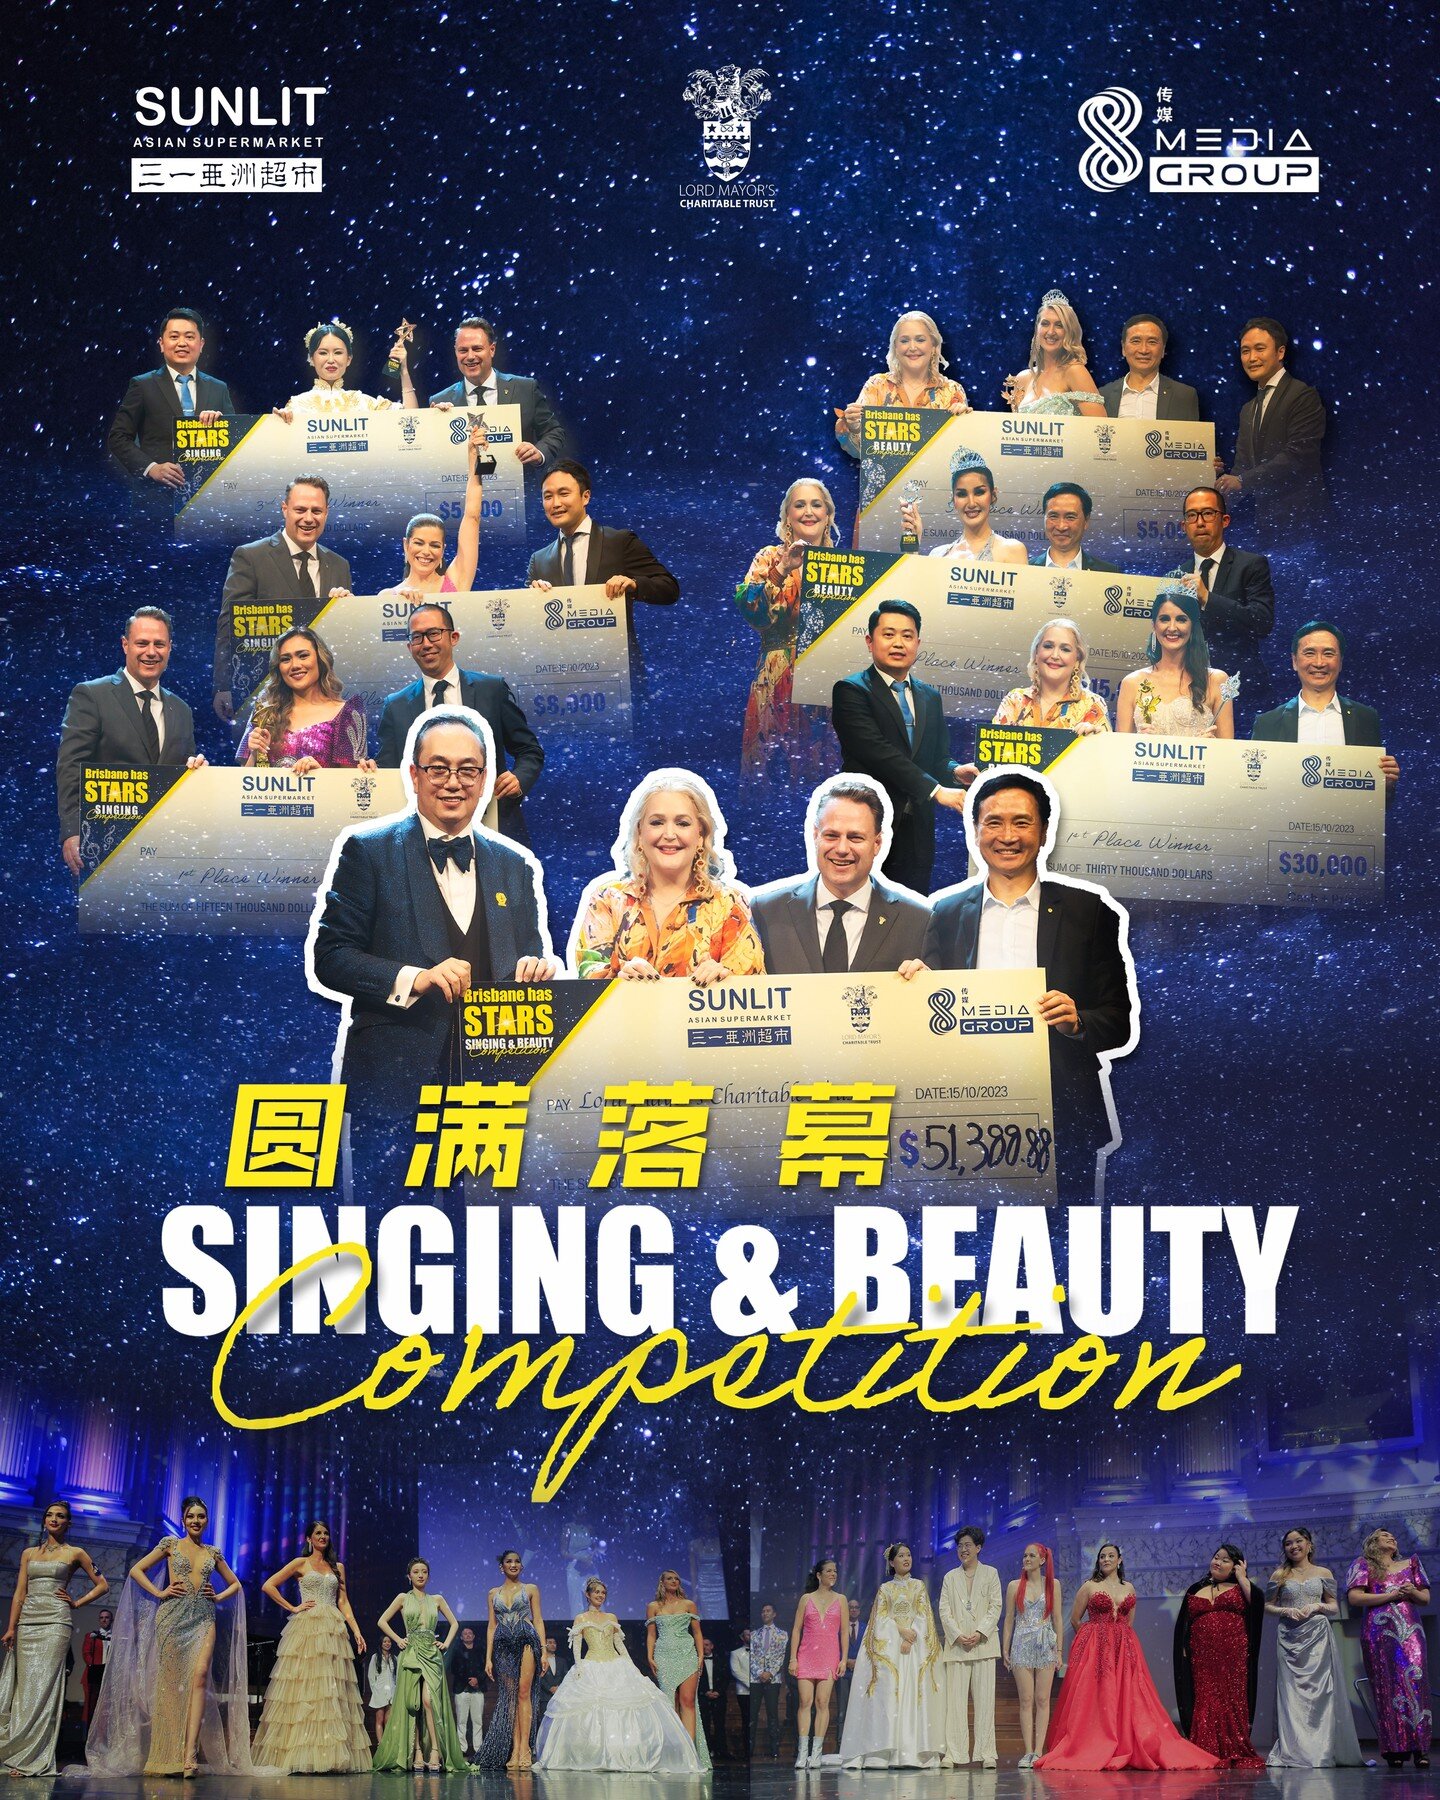 ✨The Brisbane Has Stars Singing and Beauty competition came to a successful conclusion after 200 days of preparation, culminating on 15th October. The contestants' performances were absolutely stunning. We raised over $50,000 for the Mayor's Charity 